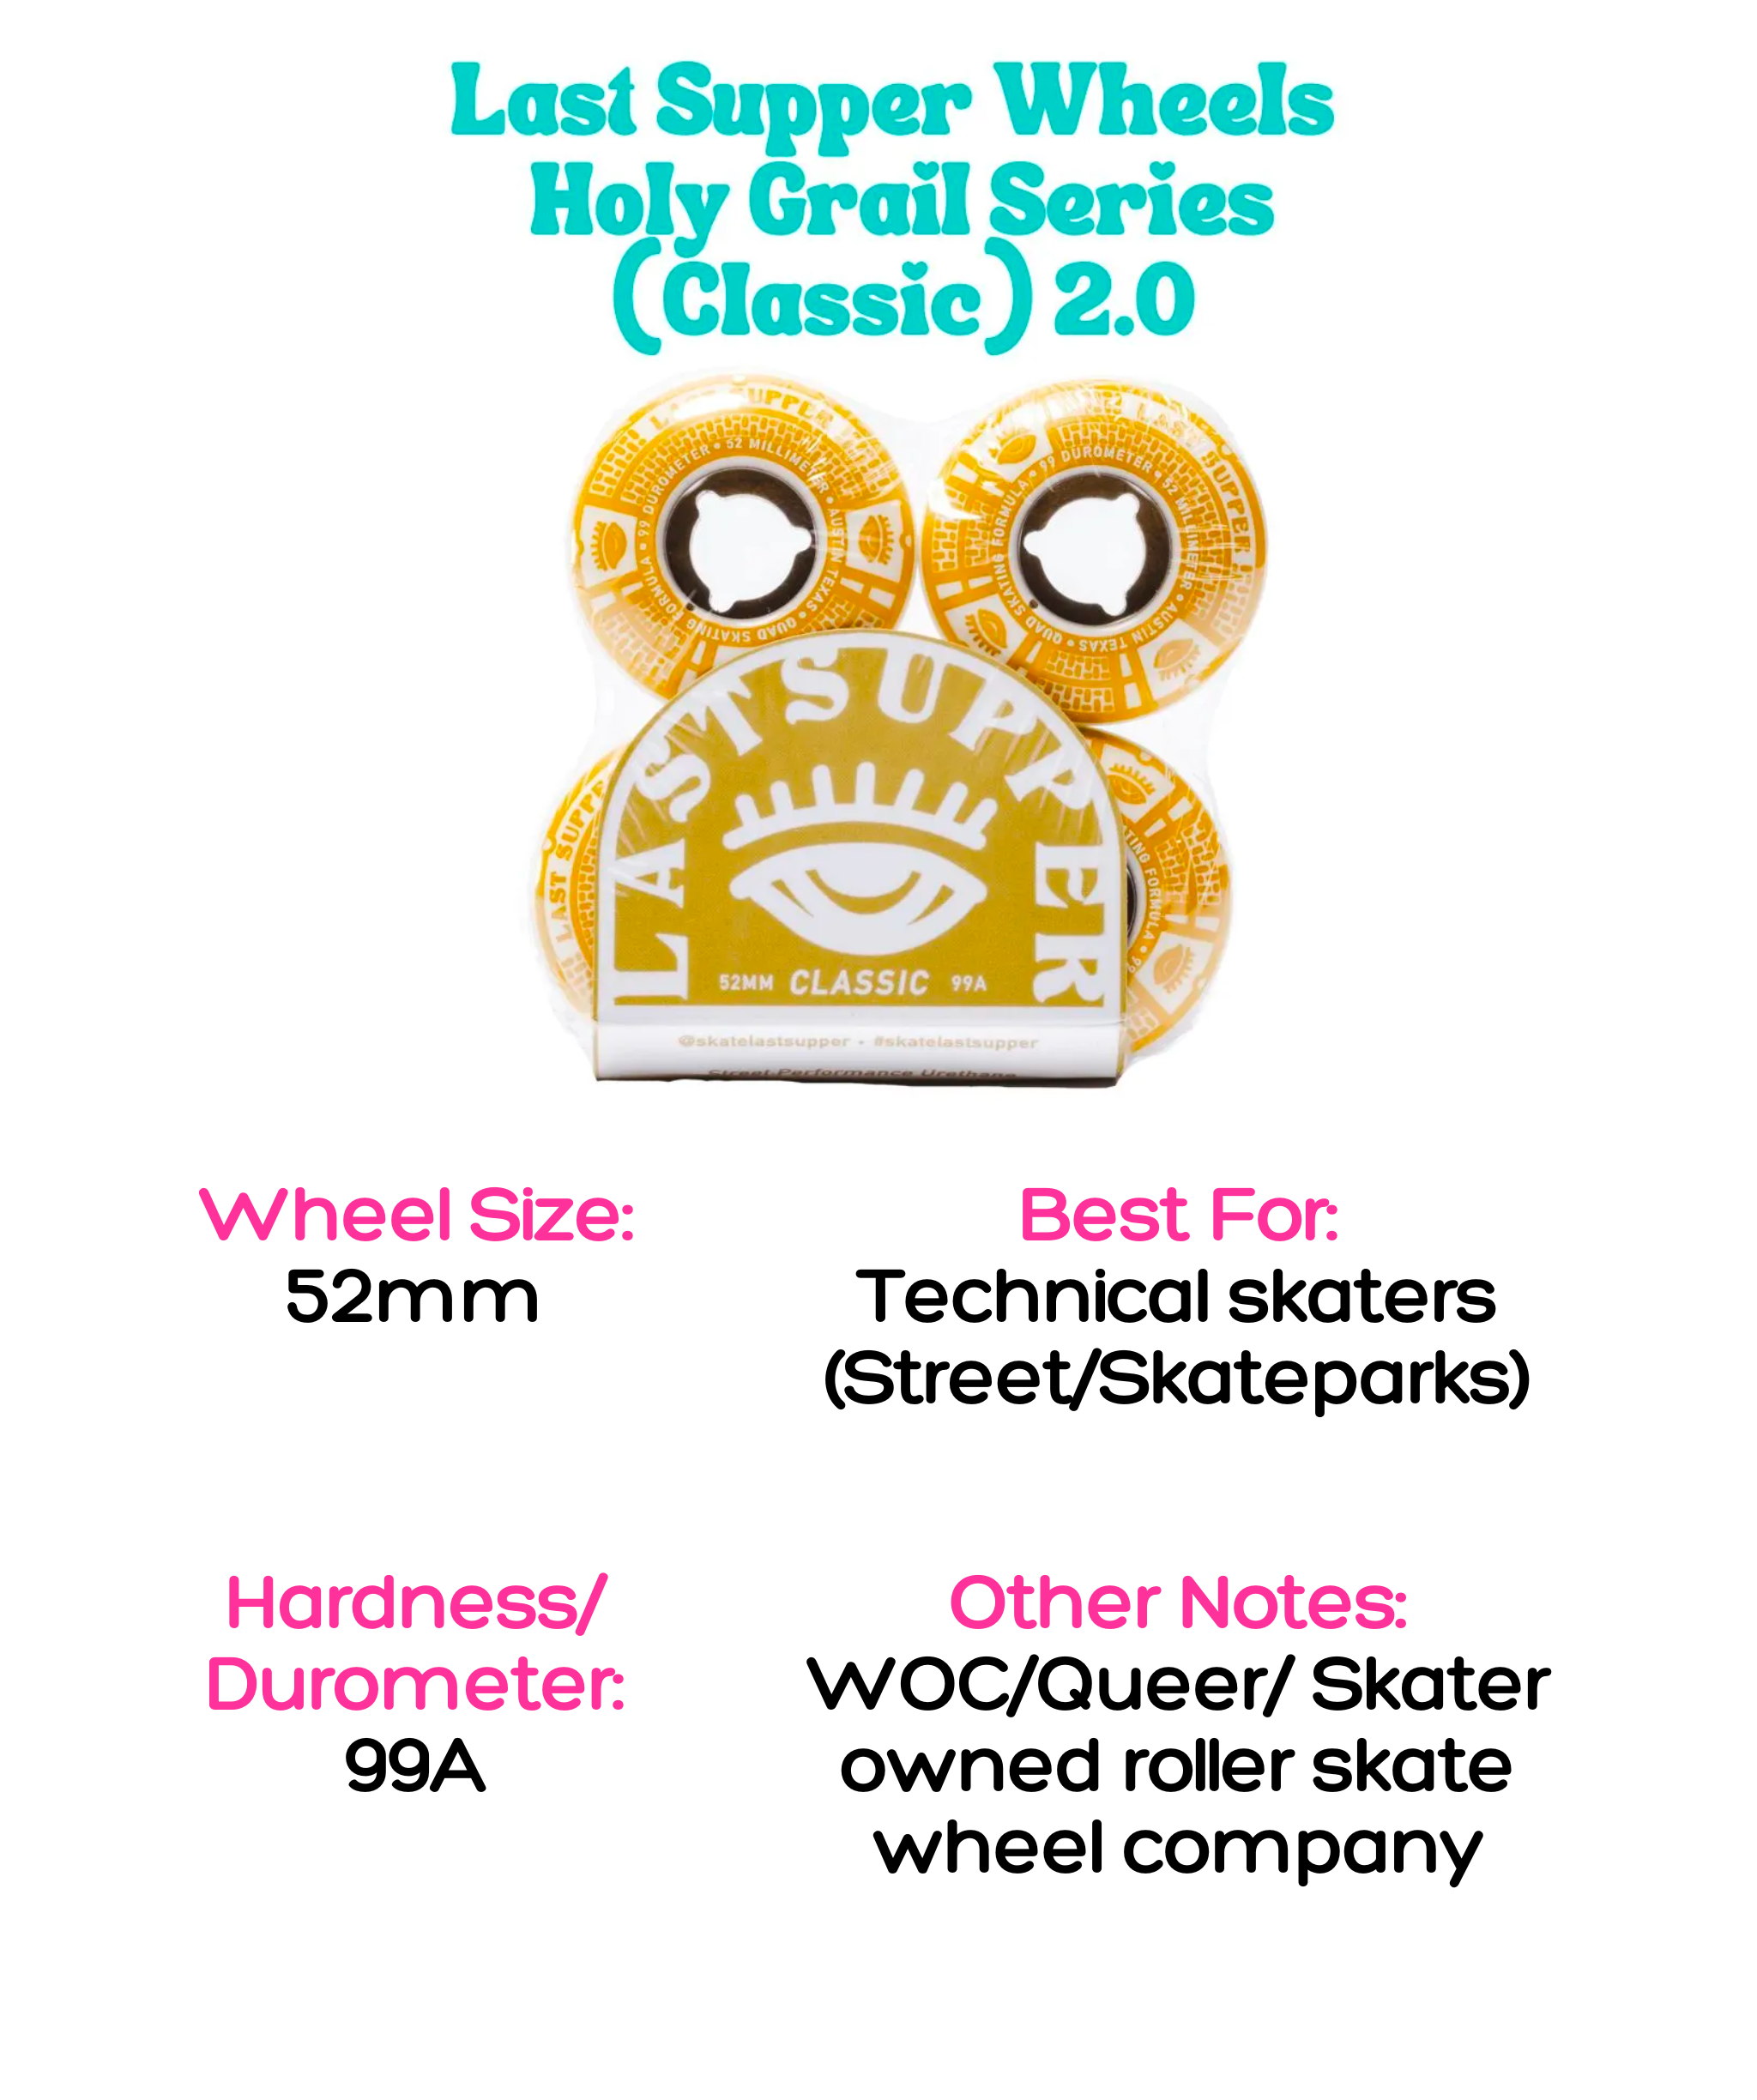 last supper wheels holy grail series classic 2.0, 52mm, 99A, best for technical skates on the street and at skateparks, 99A hardness, WOC, Queer and Skater owned roller skate wheel company